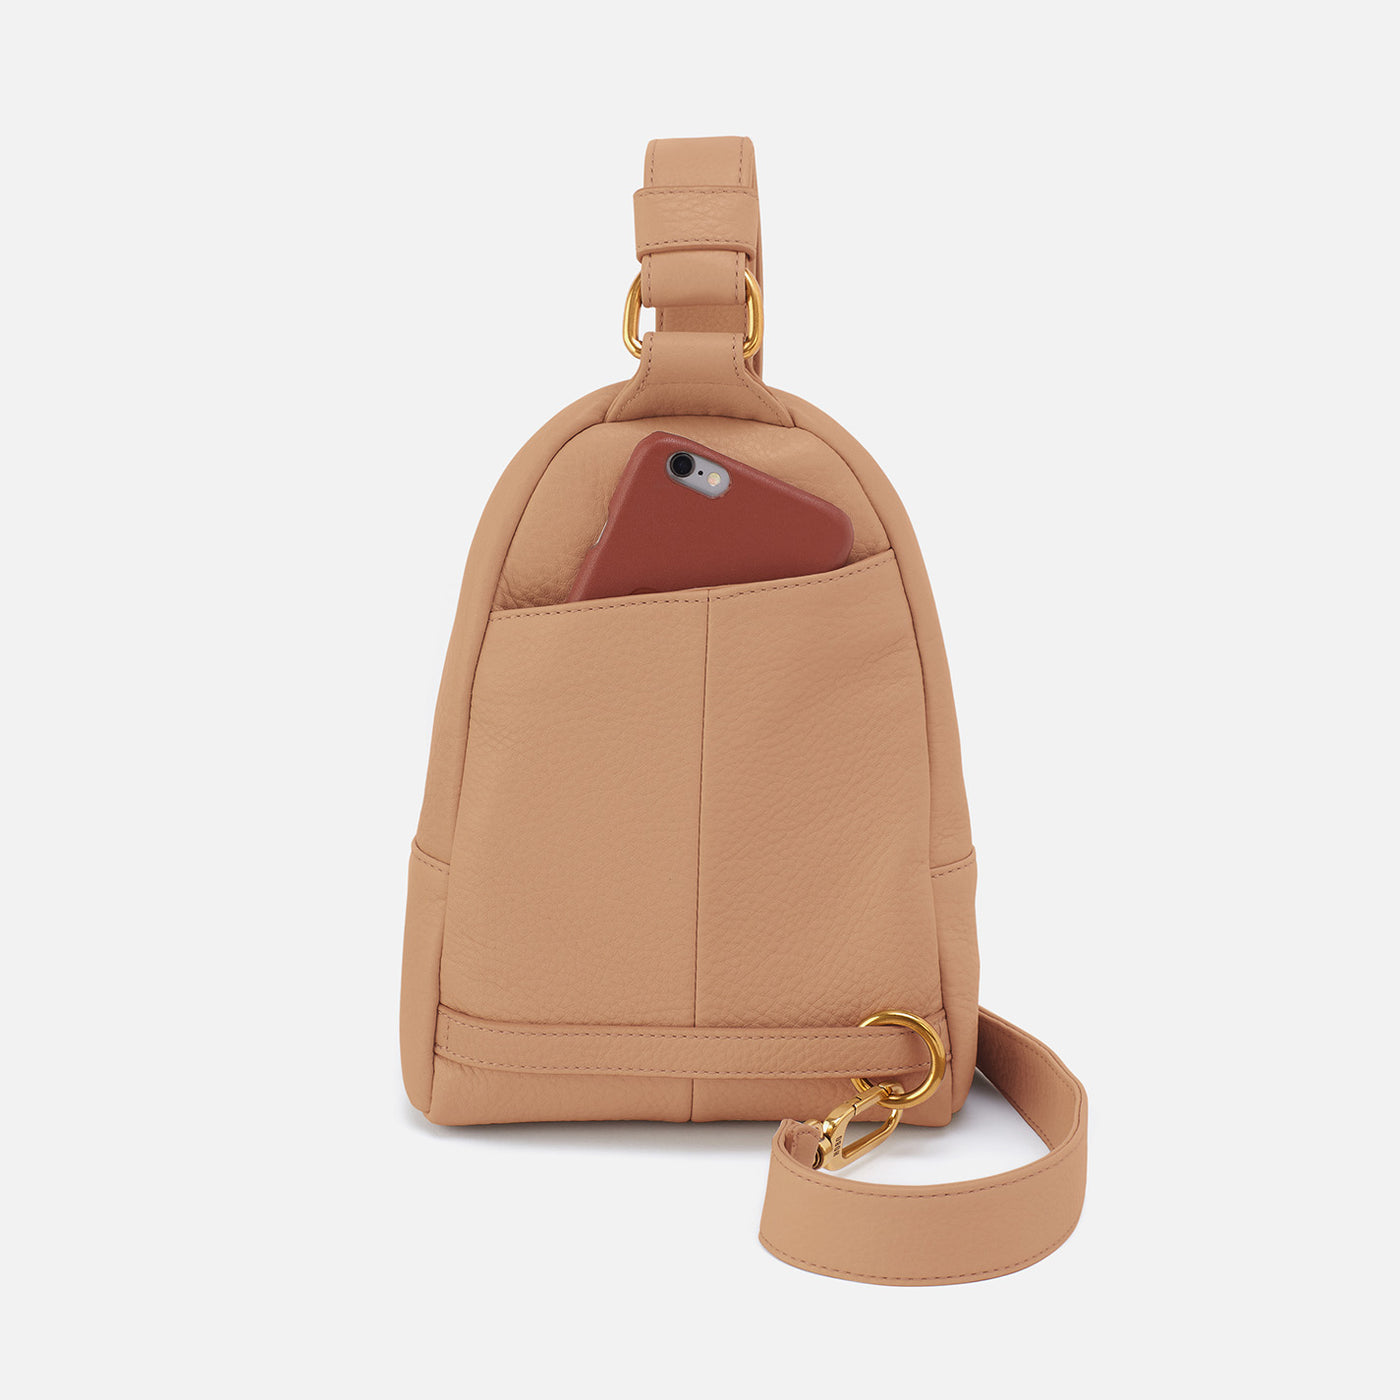 Tan Leather Sling / Bum Bag - Back In Stock